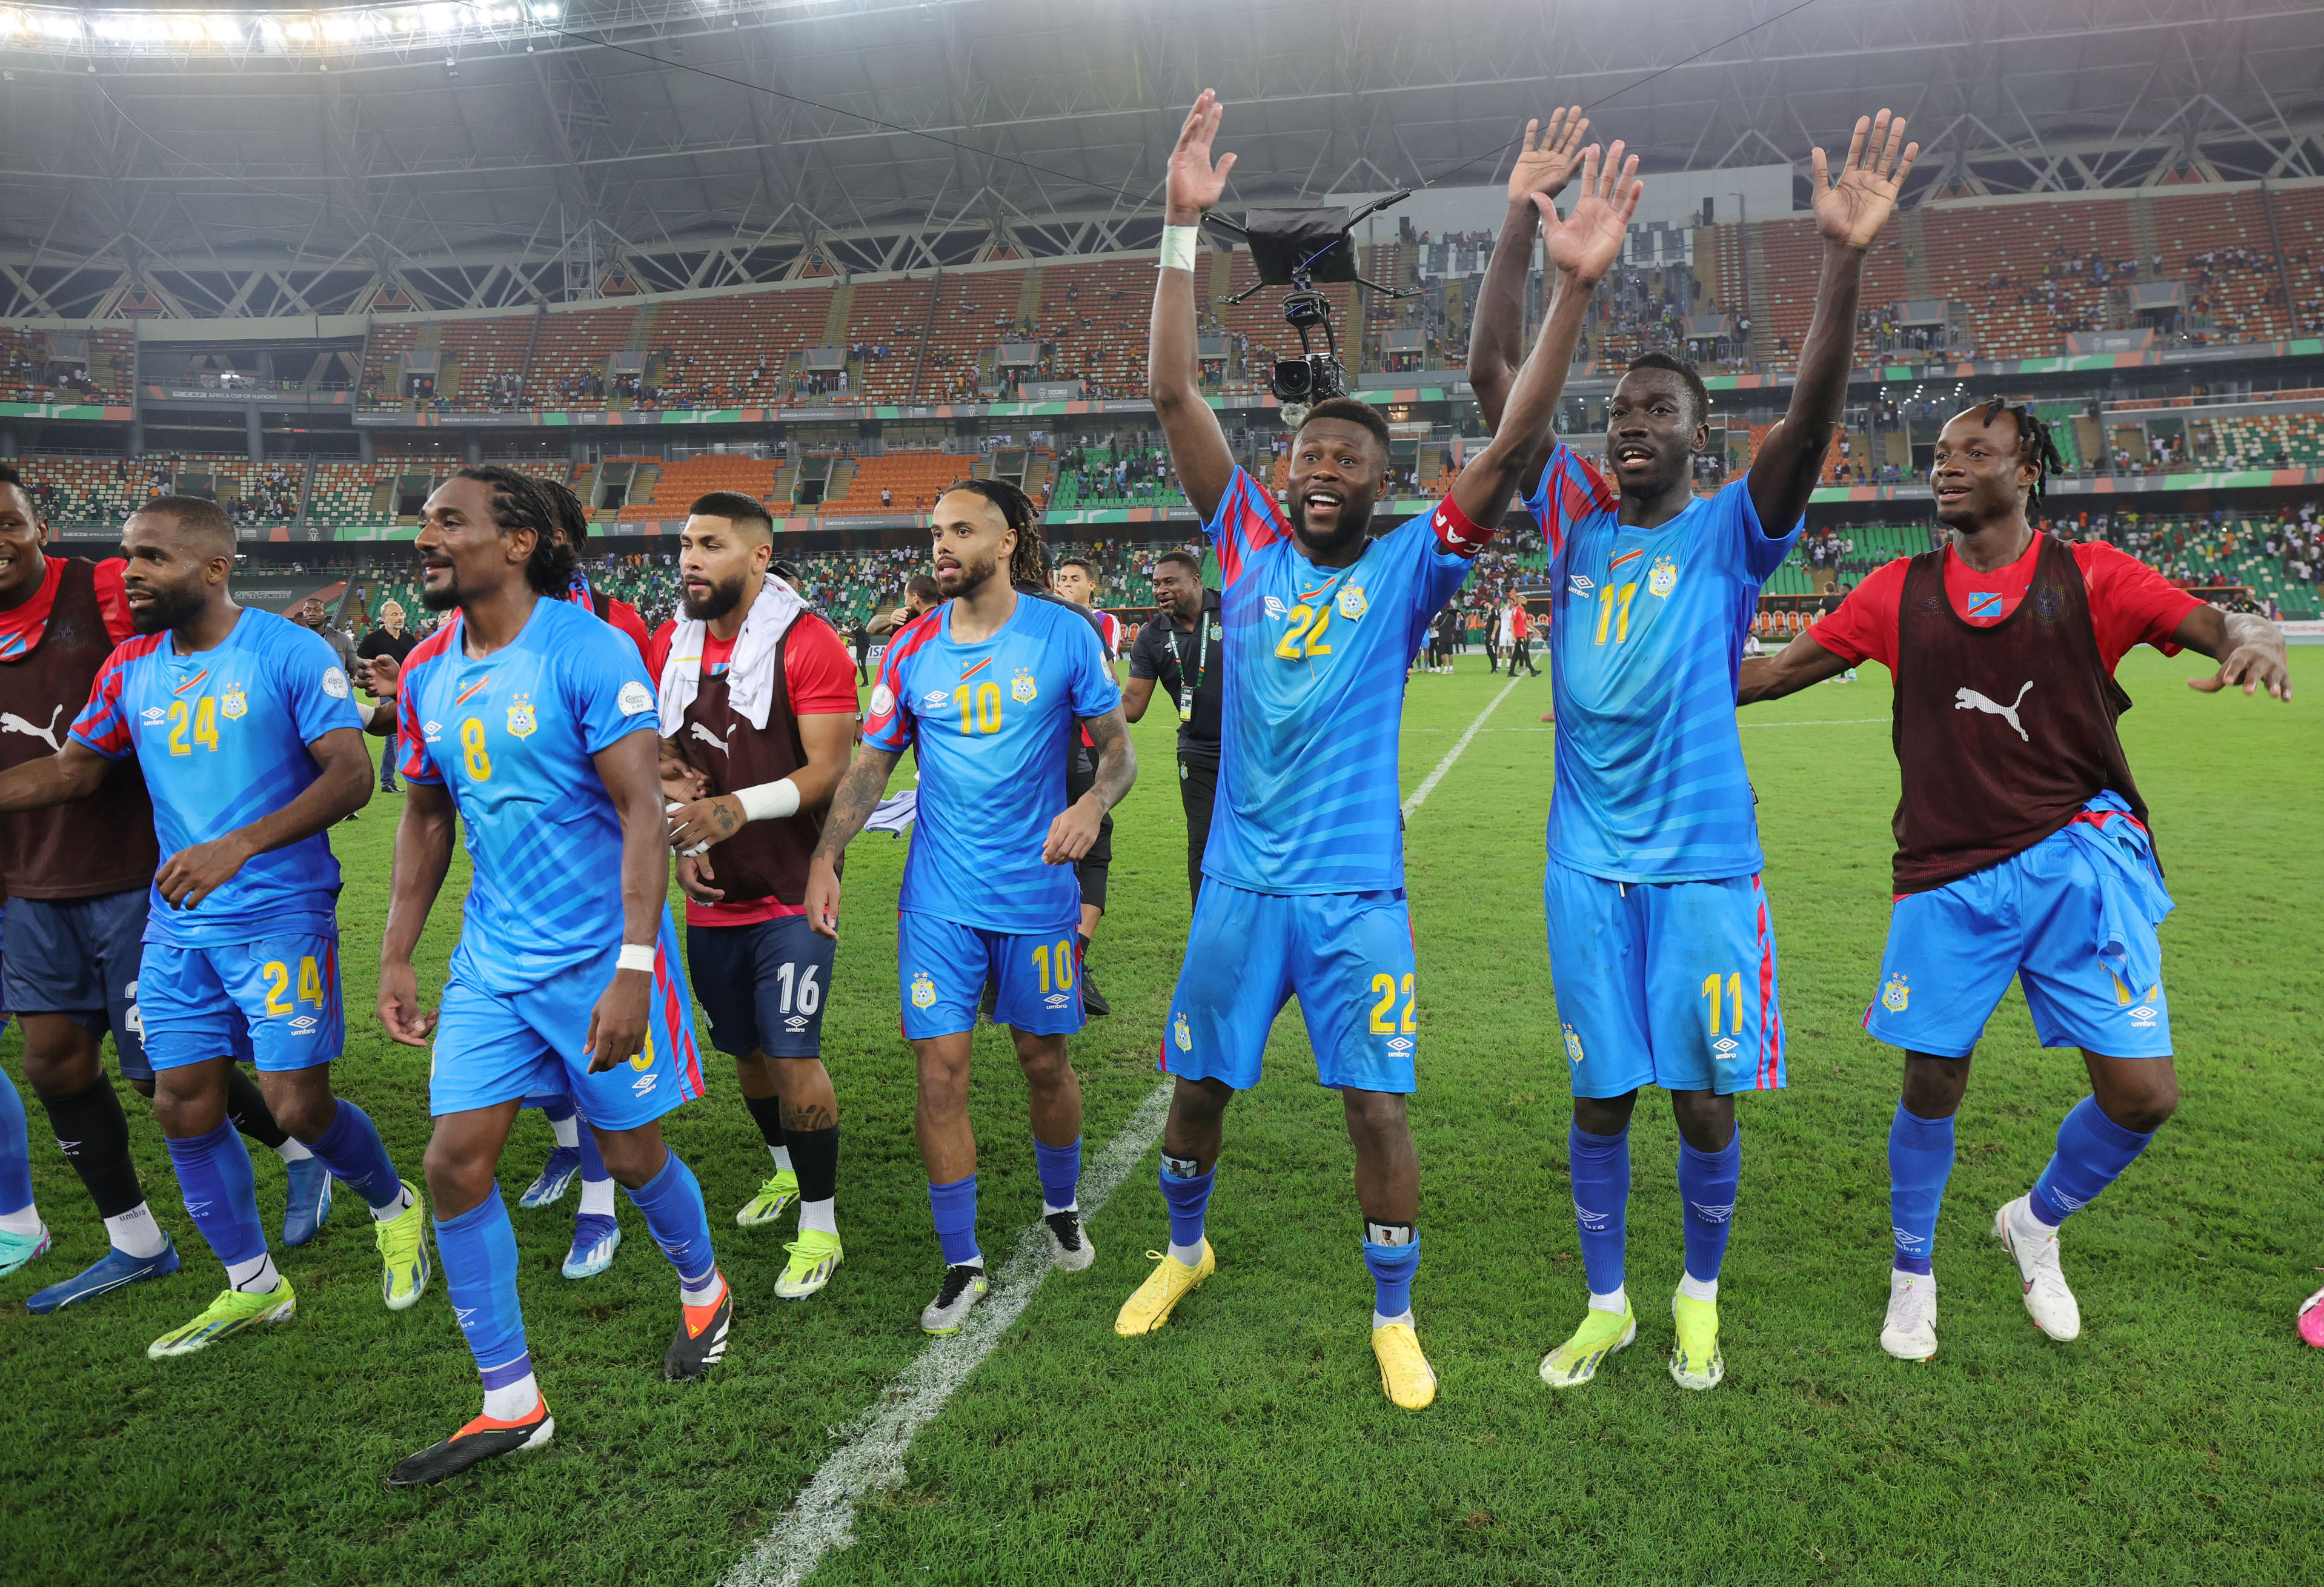 Just In: Dr Congo join Nigeria in semis, as Bayo's Guinea team suffers after lead